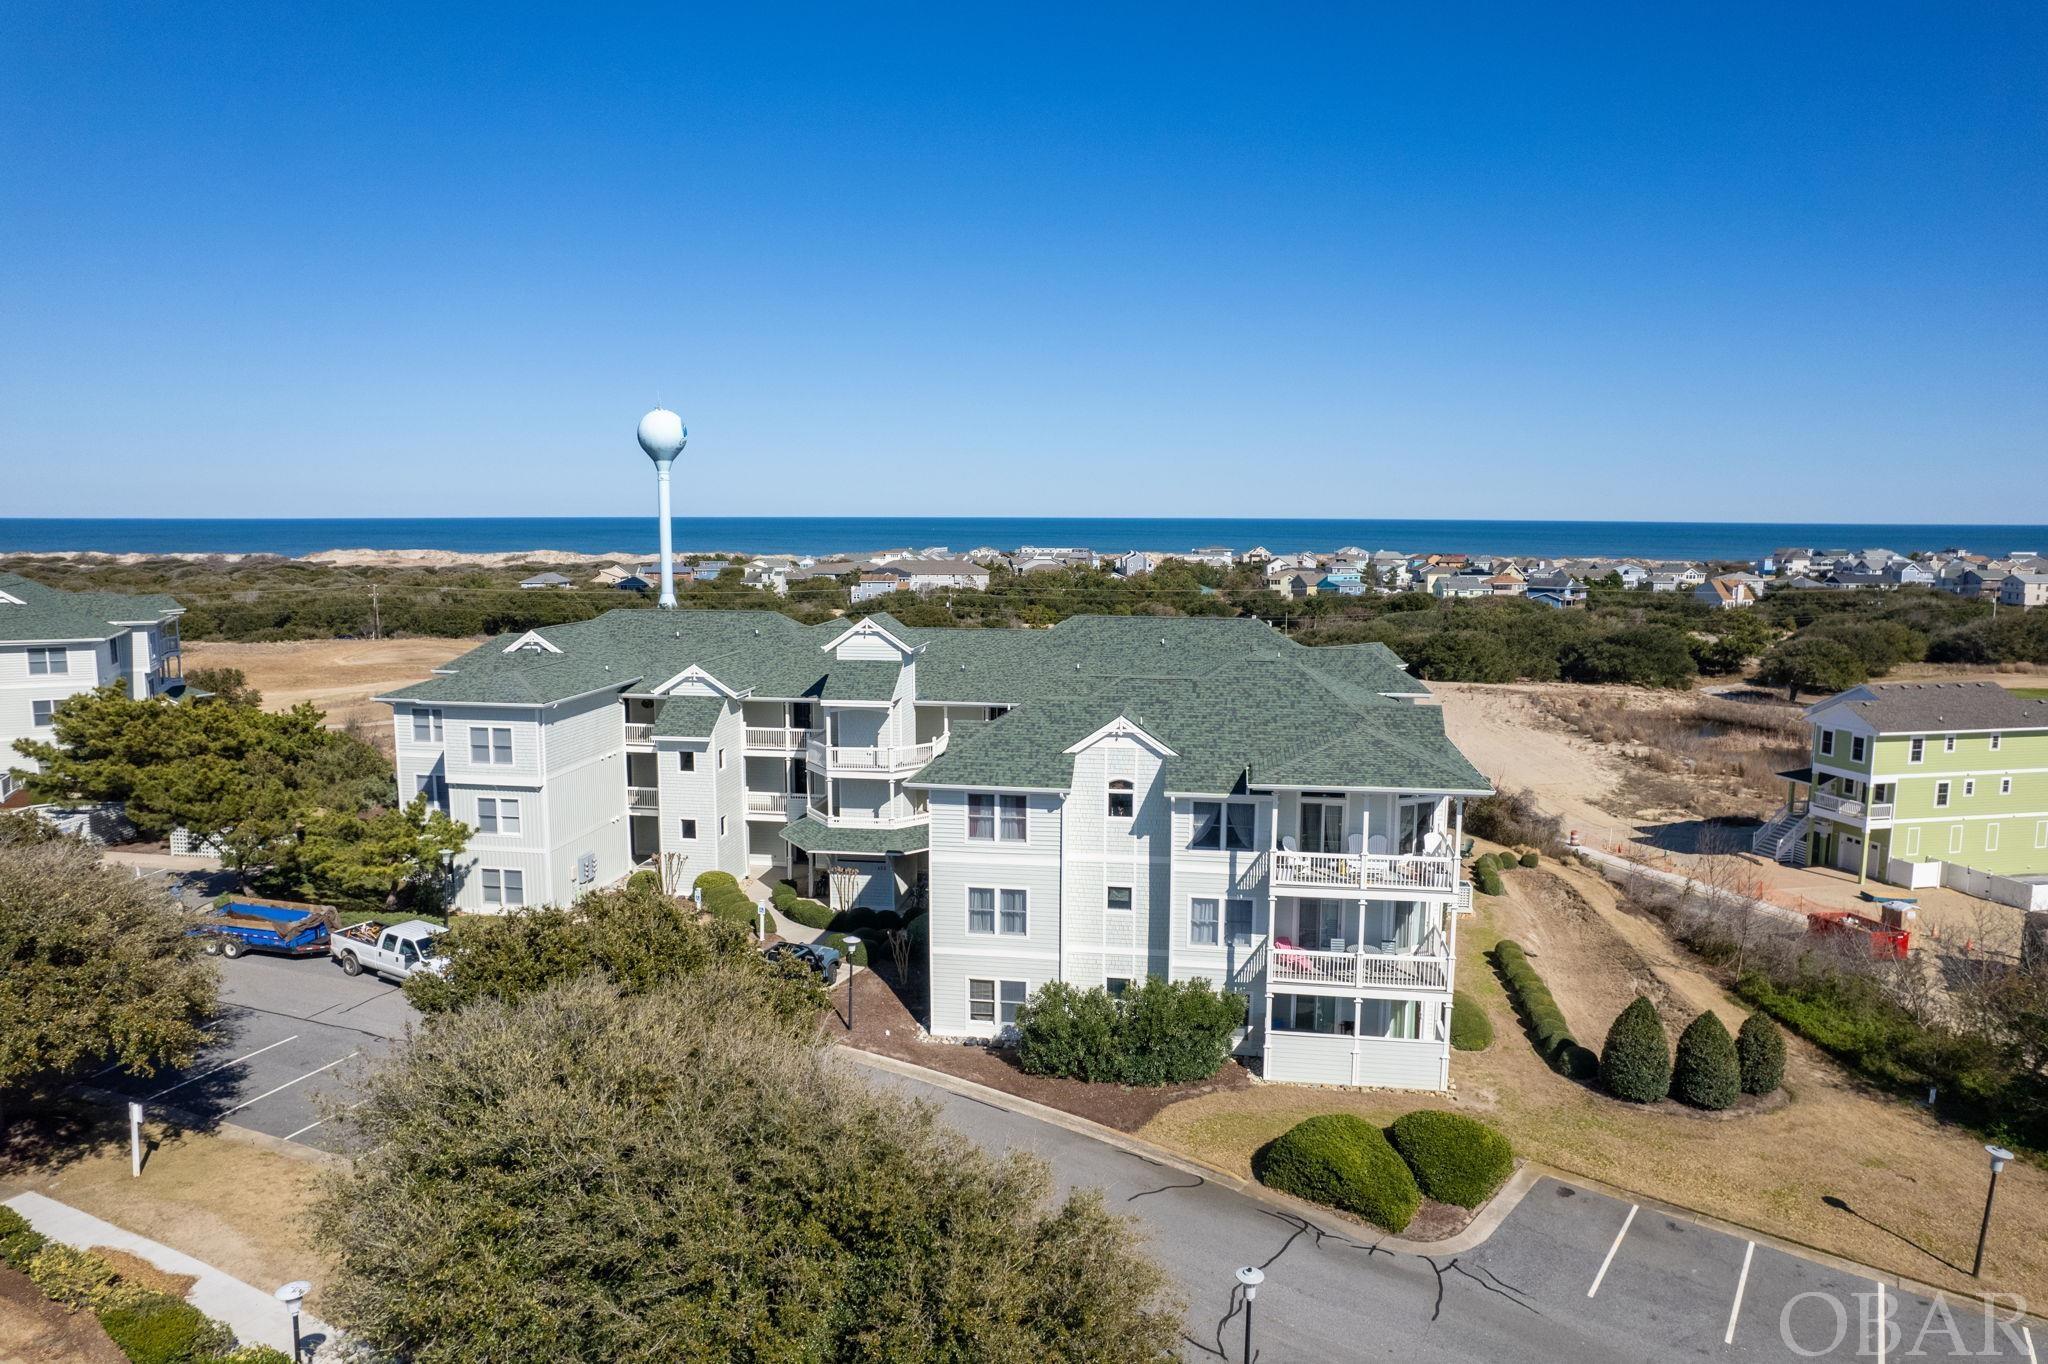 653 Sand and Sea Court, Corolla, NC 27927, 2 Bedrooms Bedrooms, ,2 BathroomsBathrooms,Residential,For sale,Sand and Sea Court,125043